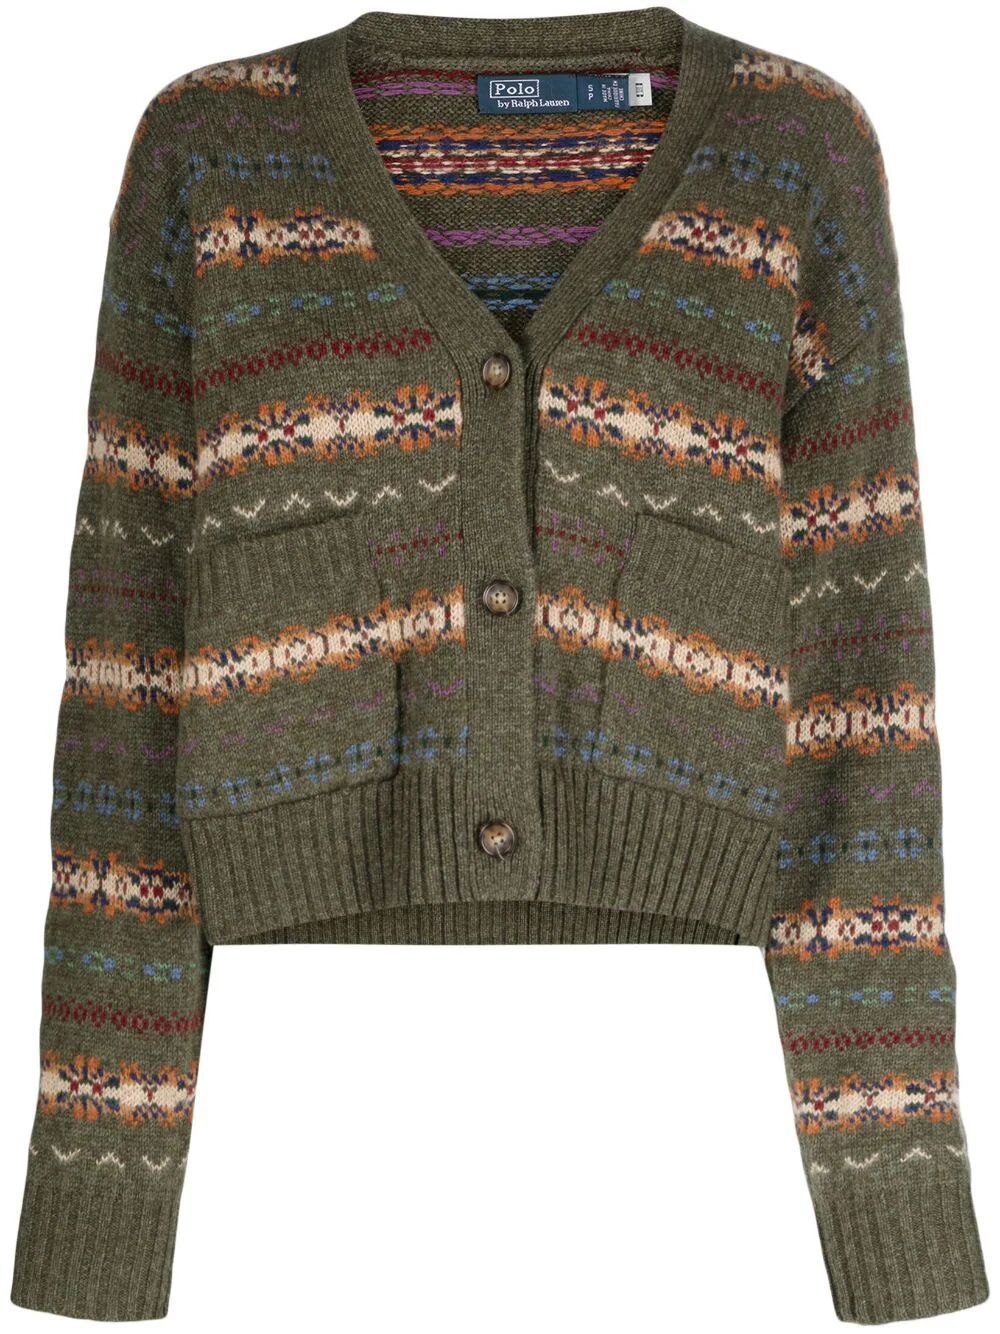 POLO RALPH LAUREN LONG SLEEVES EMBROIDERED CARDIGAN,211.910464